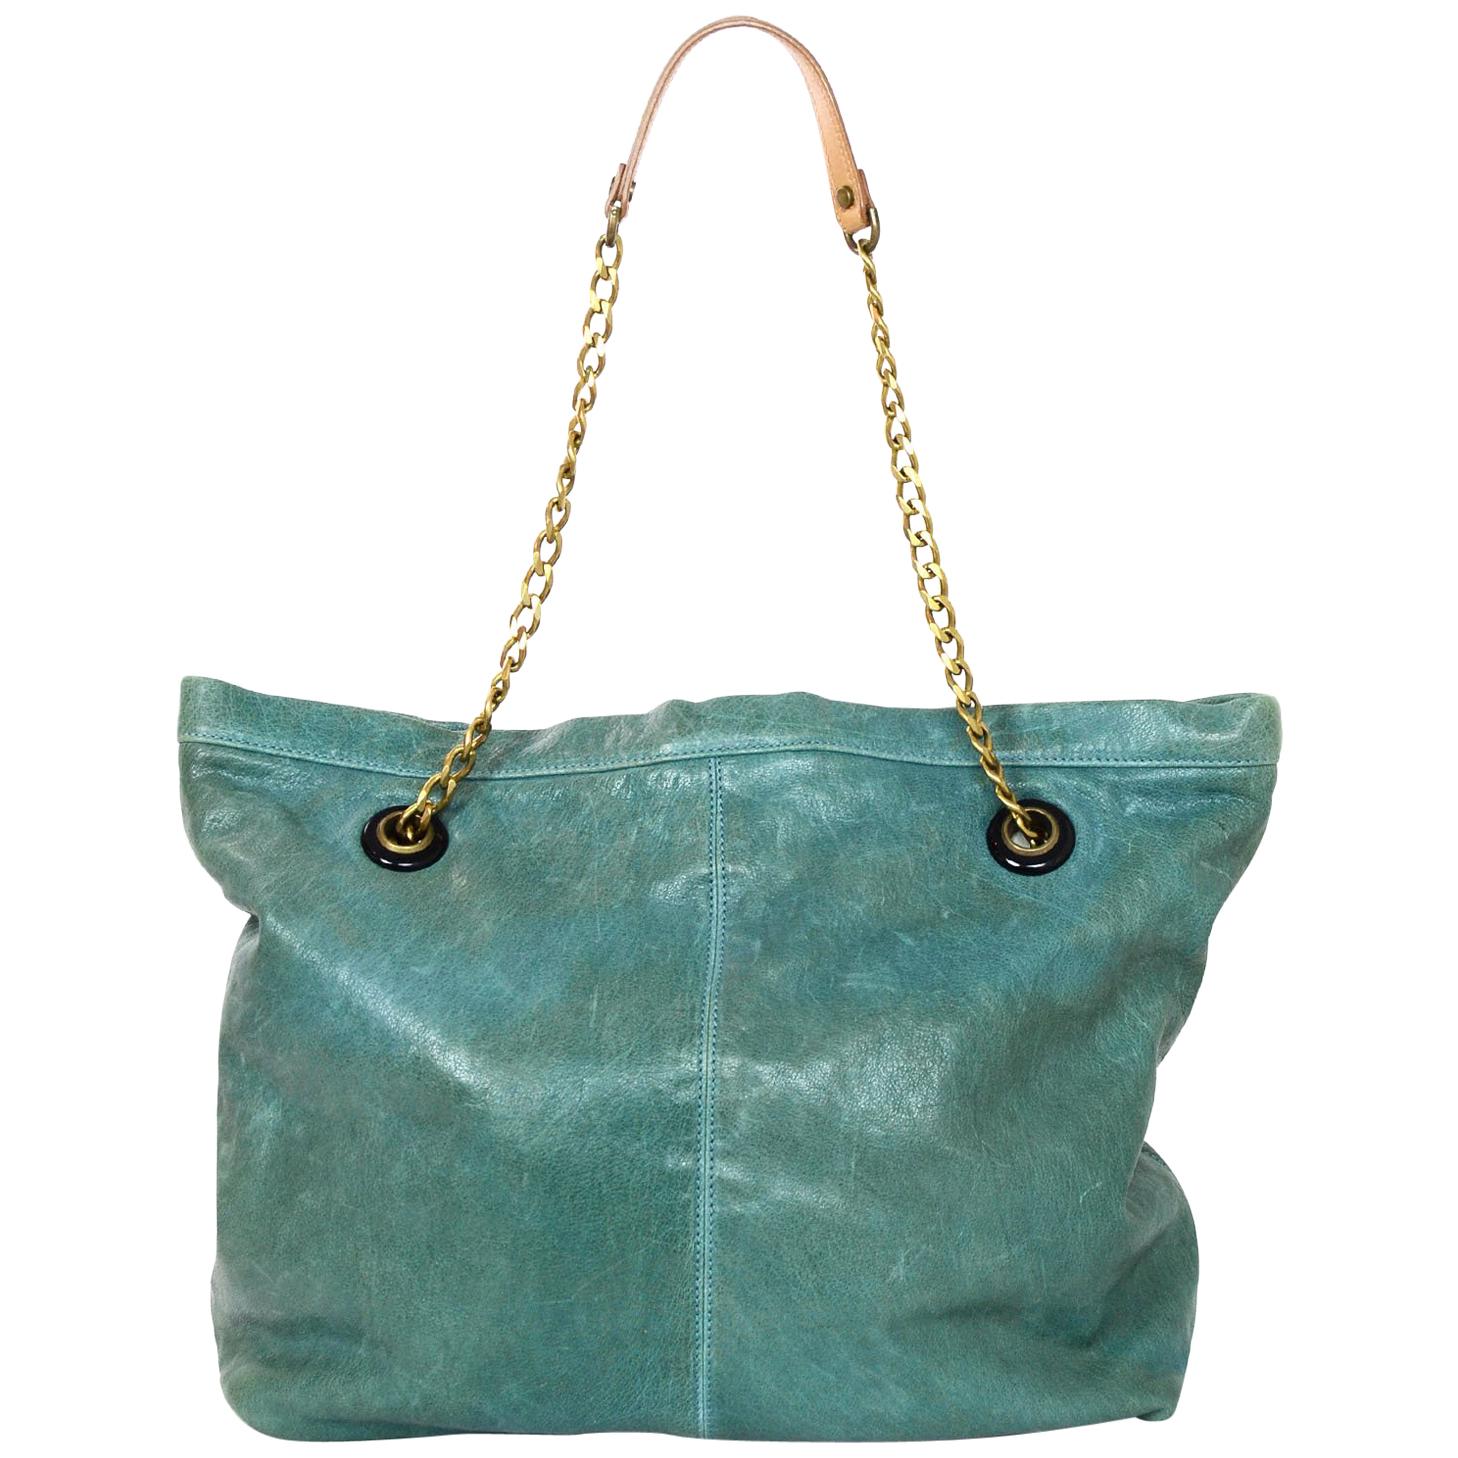 Lanvin Turquoise Distressed Leather Tote Bag w. Dust Bag